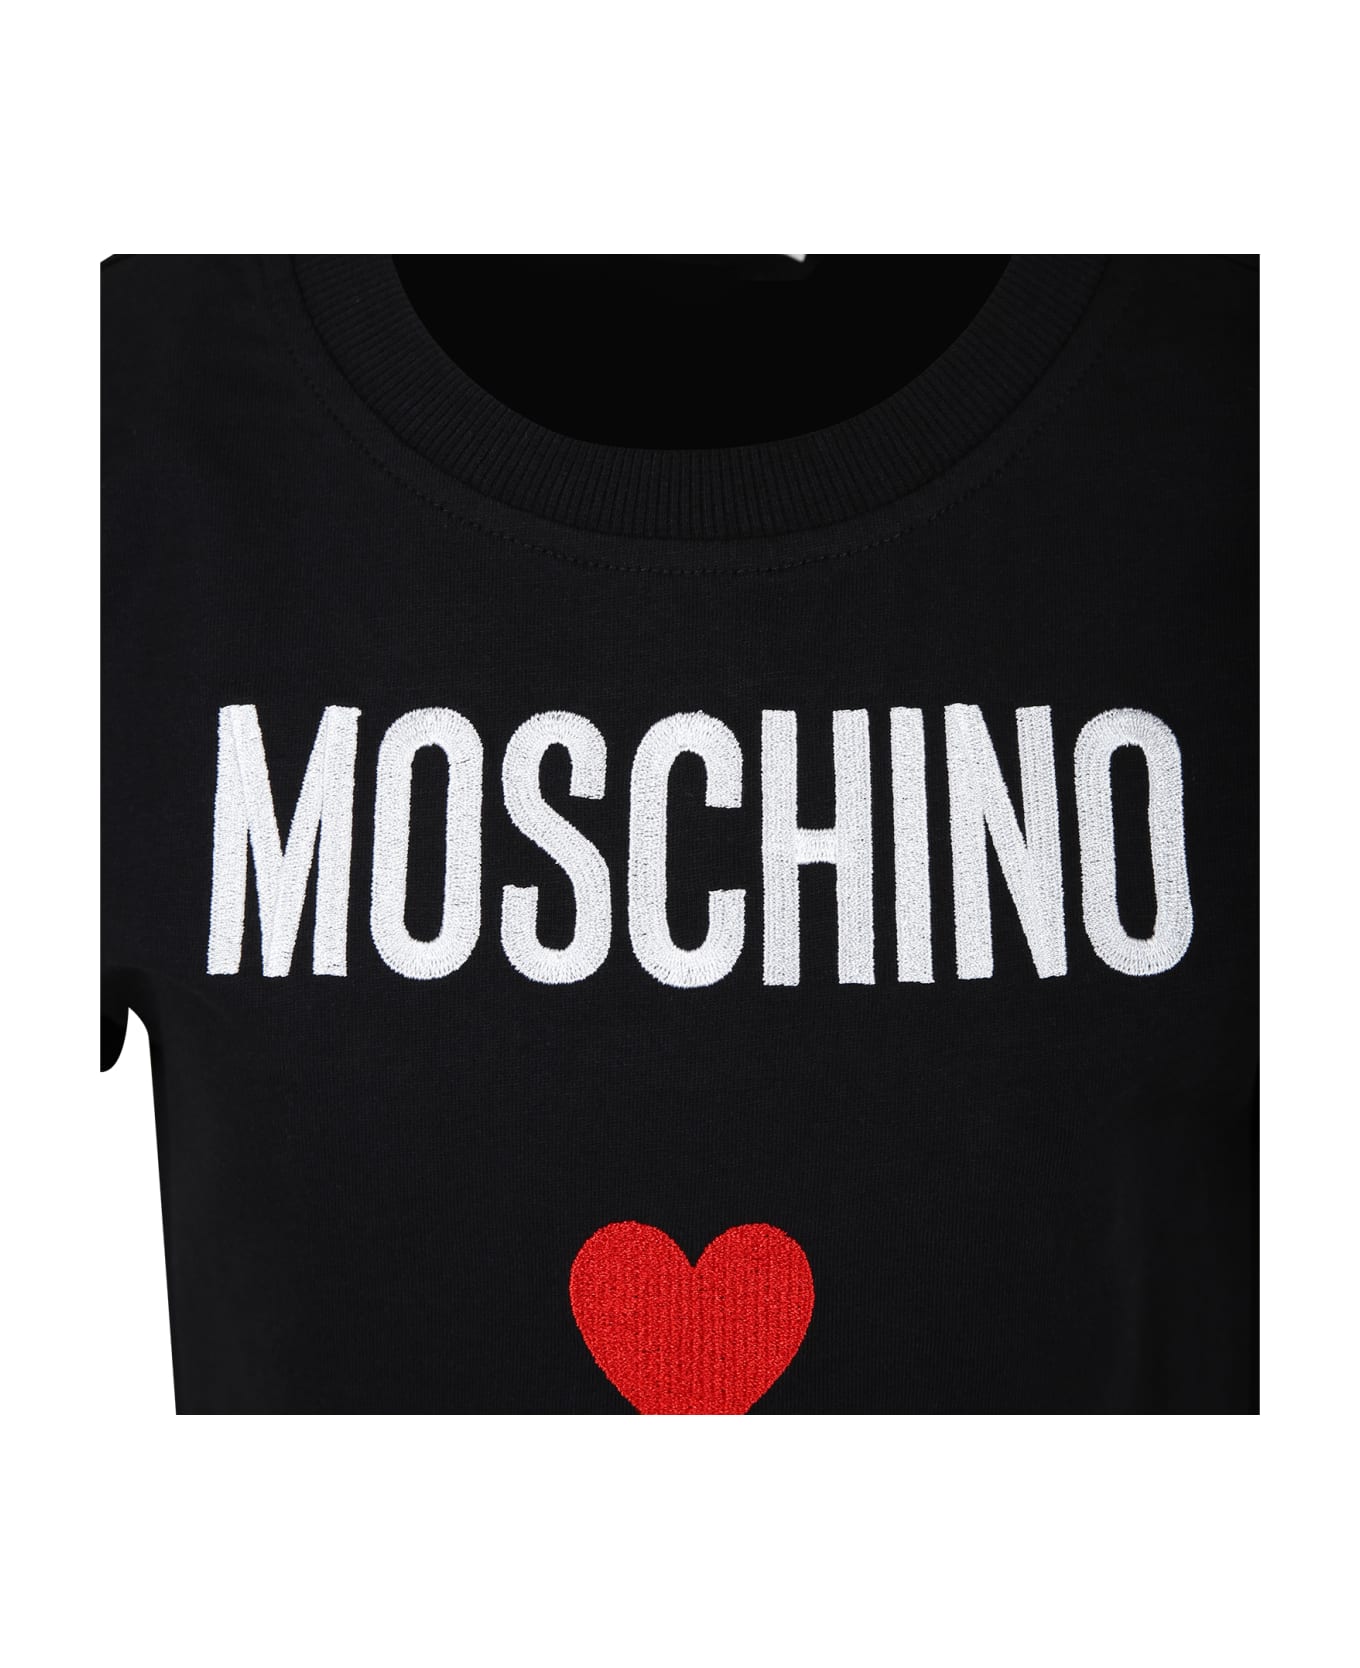 Moschino Black Dress For Girl With Logo And Heart - Black ワンピース＆ドレス